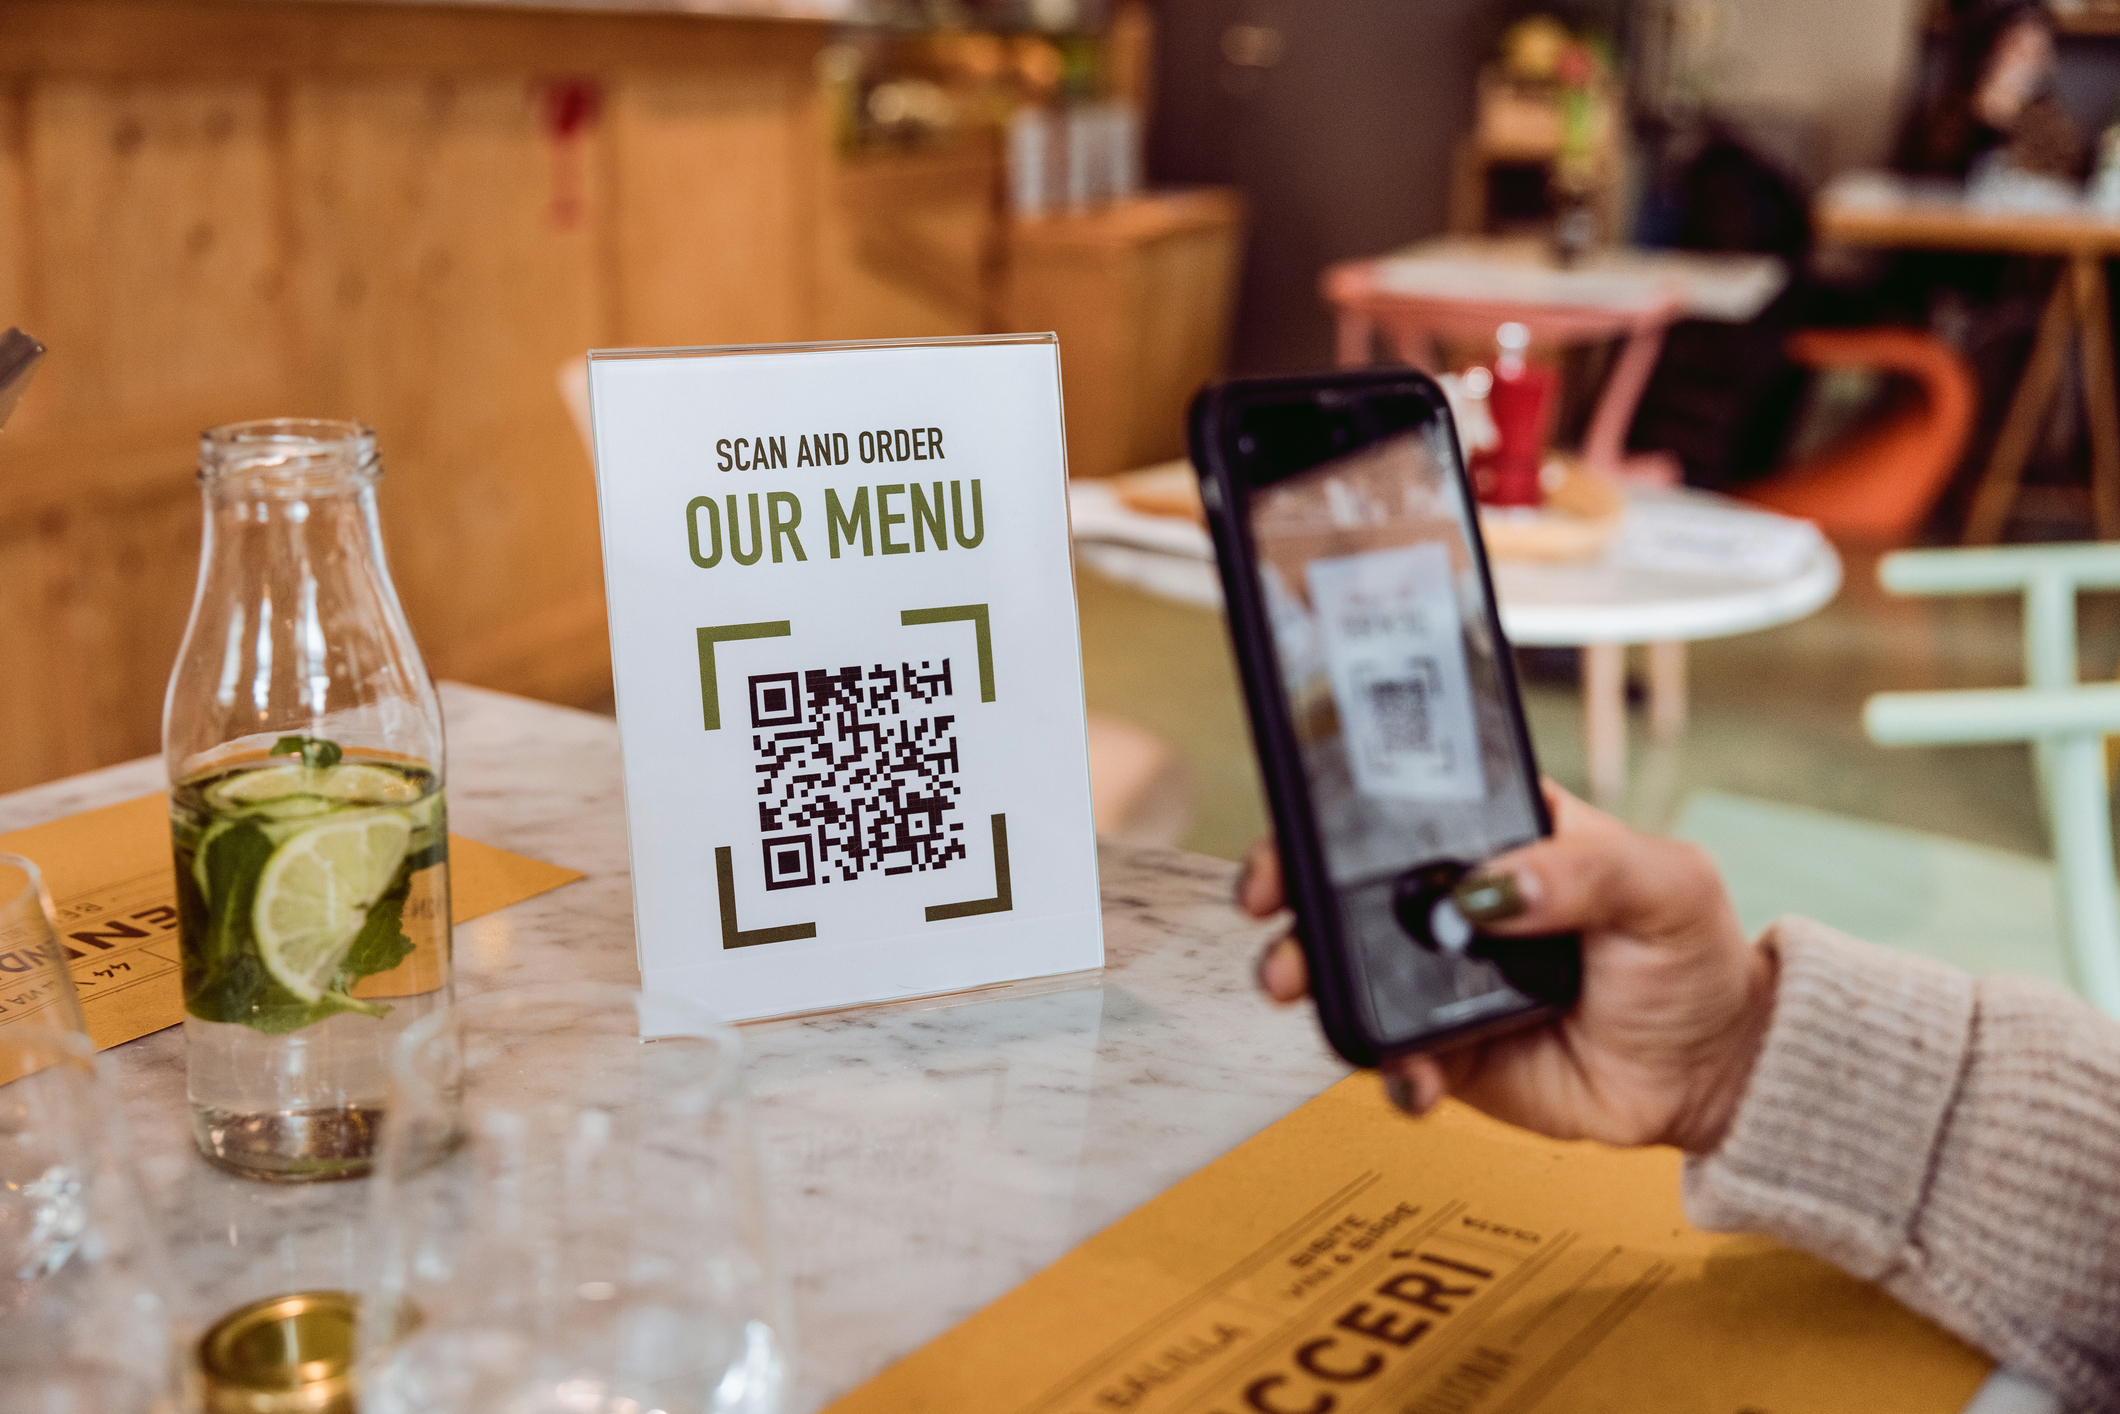 Person scanning a QR code on a &quot;Scan and Order OUR MENU&quot; sign with a smartphone in a restaurant setting